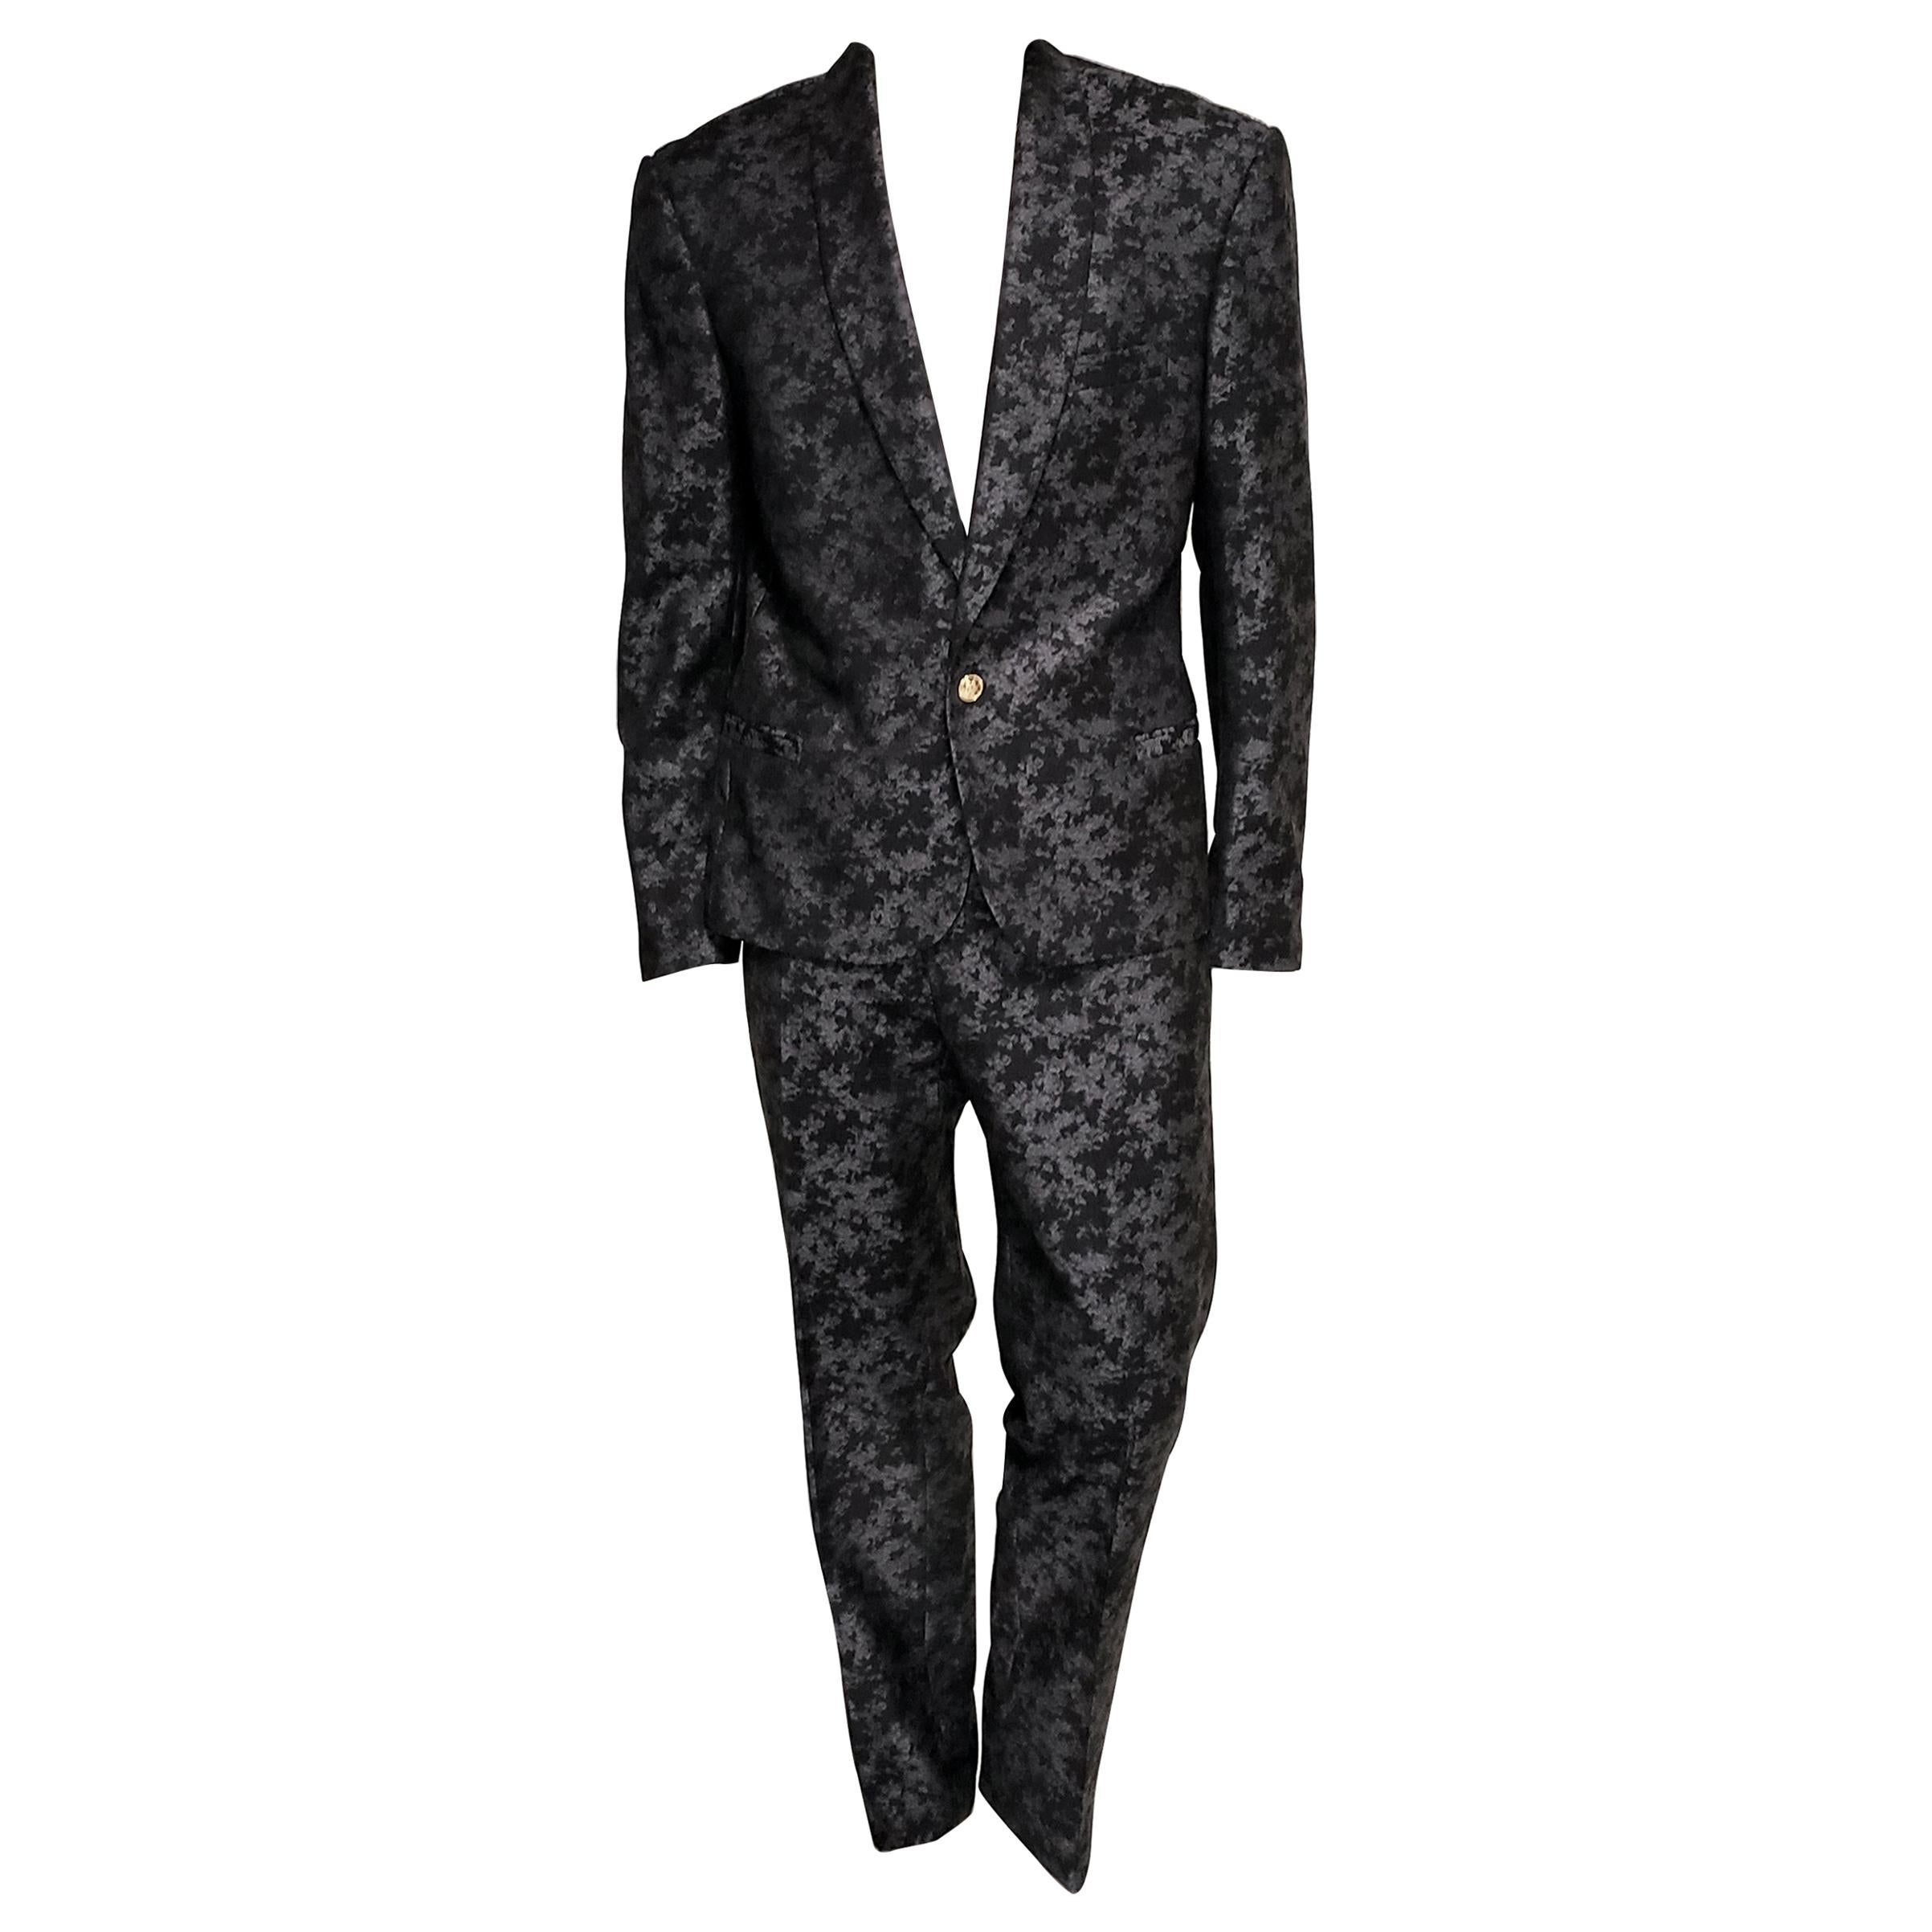 FALL/WINTER 2012 look # 16, 22 BRAND NEW VERSACE GRAY SUIT 48 - 38 (M)